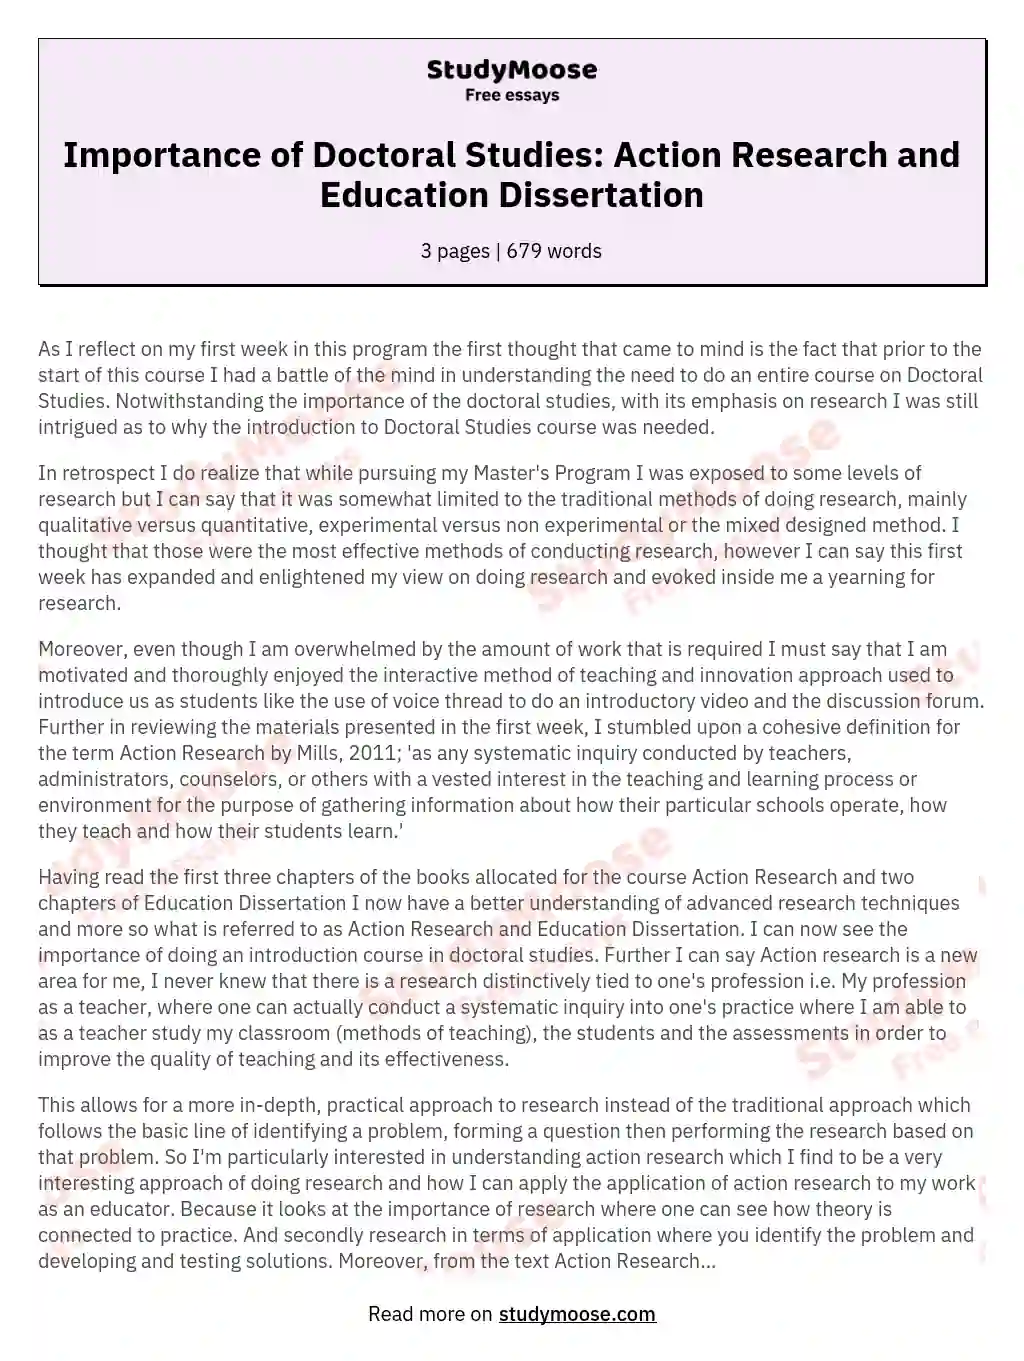 Importance of Doctoral Studies: Action Research and Education Dissertation